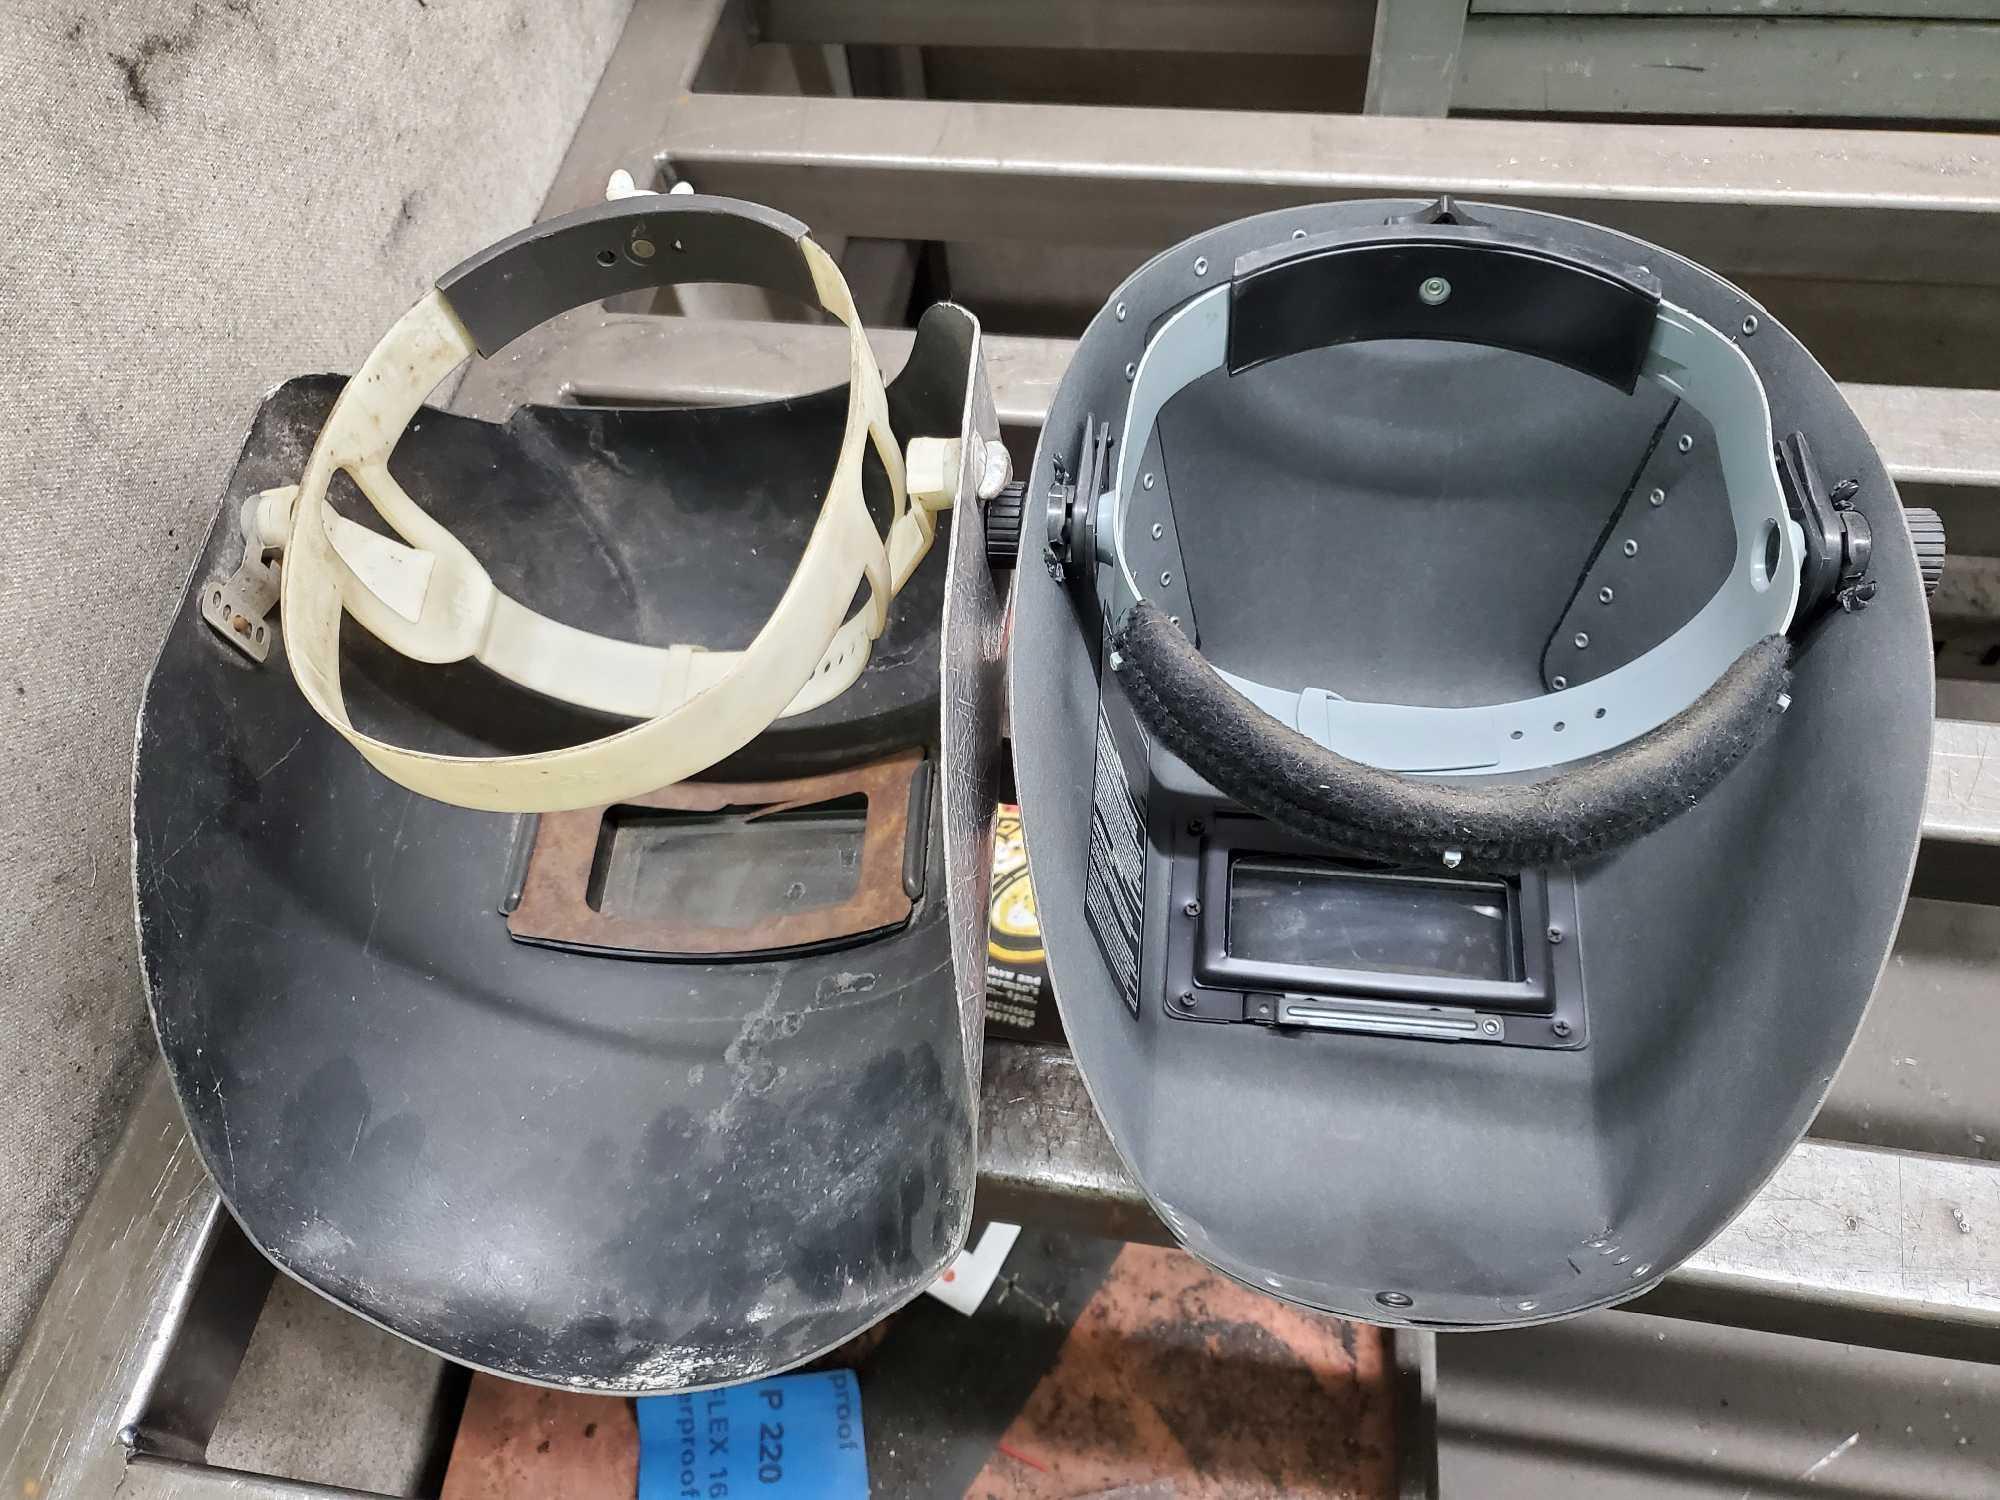 WELDING TABLE AND HELMETS